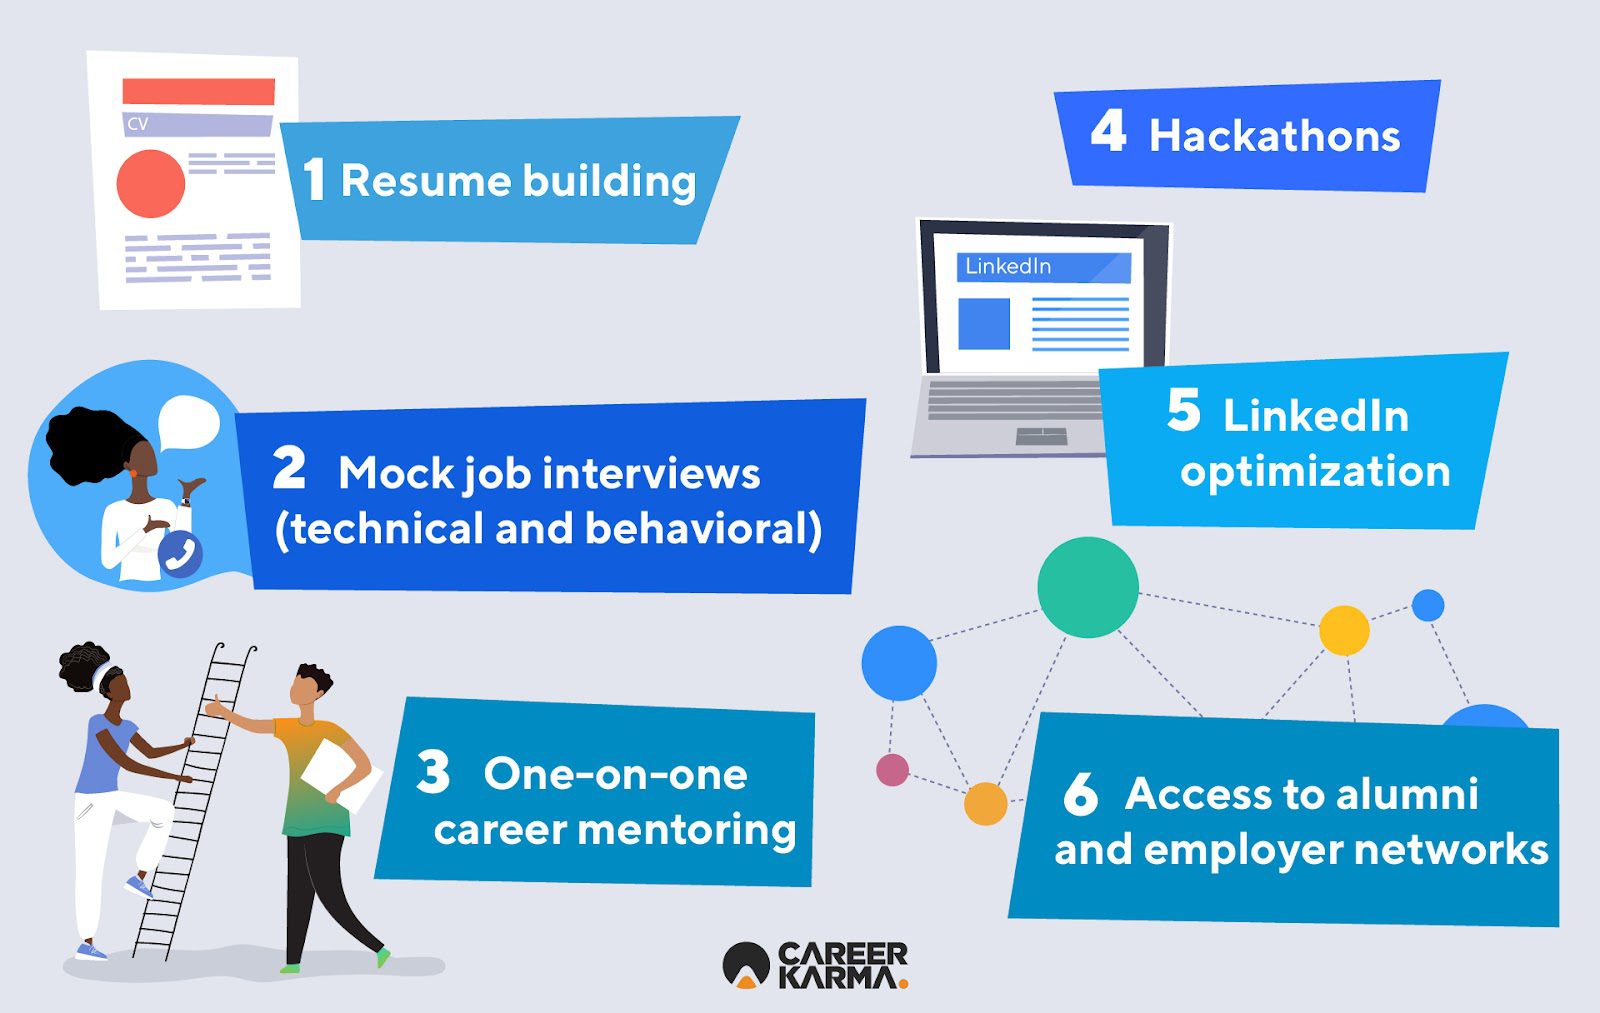 An infographic listing Coding Temple’s key career services